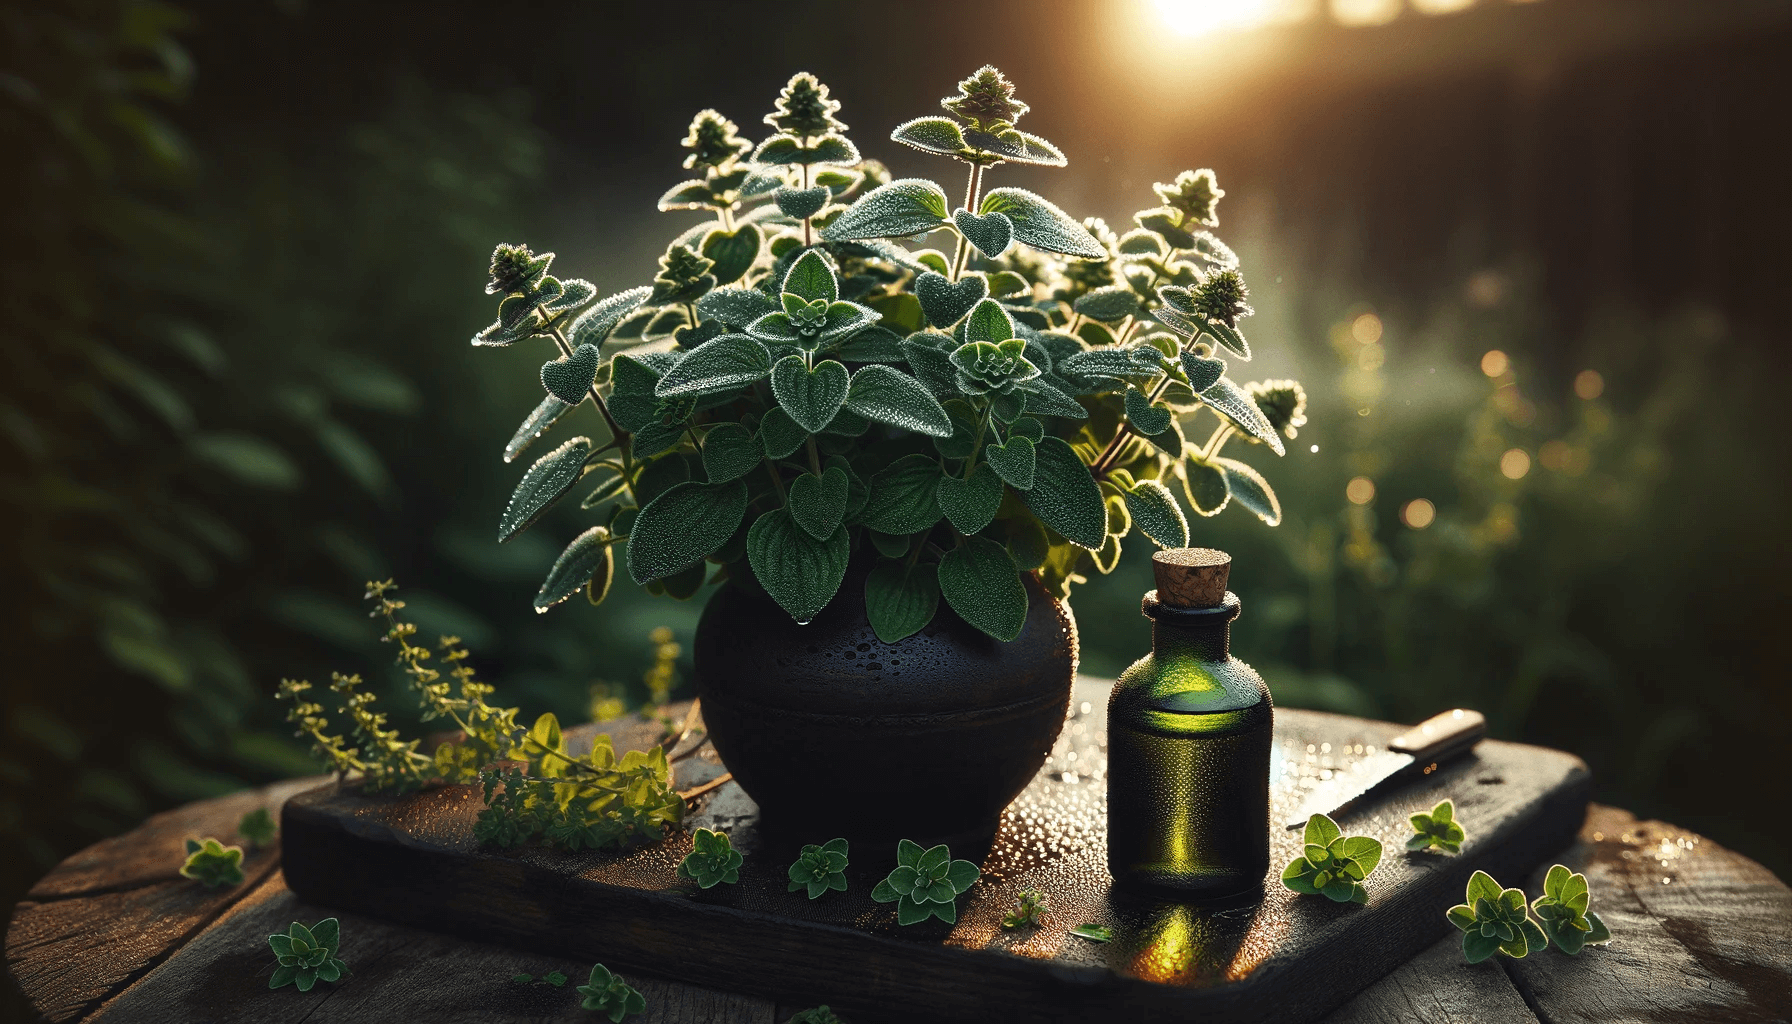 Oregano plant in full bloom, its leaves glistening with morning dew.